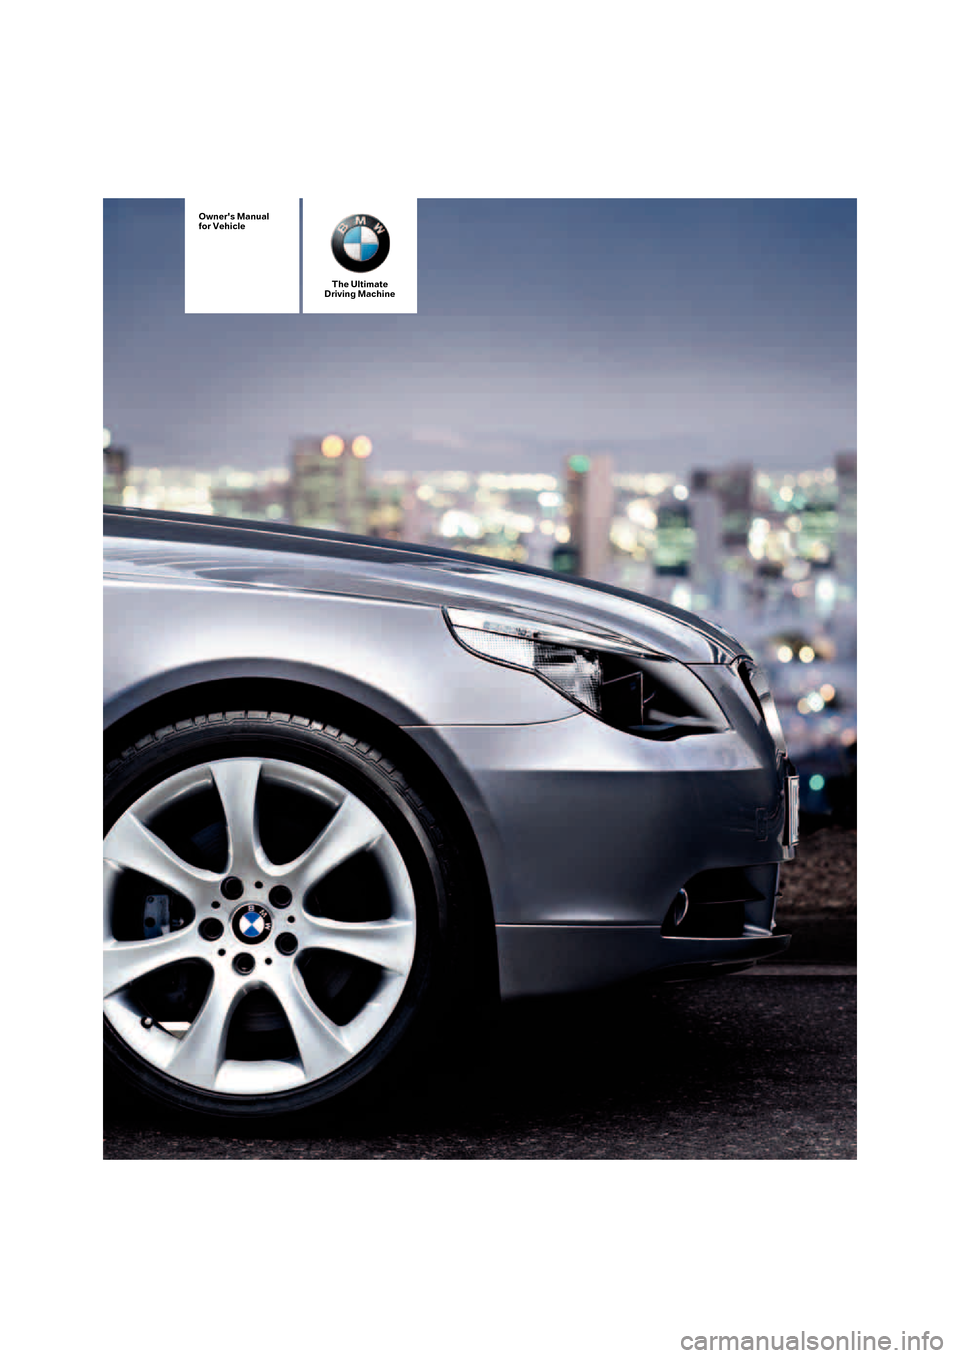 BMW 530I SEDAN 2006 E60 Owners Manual The Ultimate
Driving Machine
Owners Manual
for Vehicle 